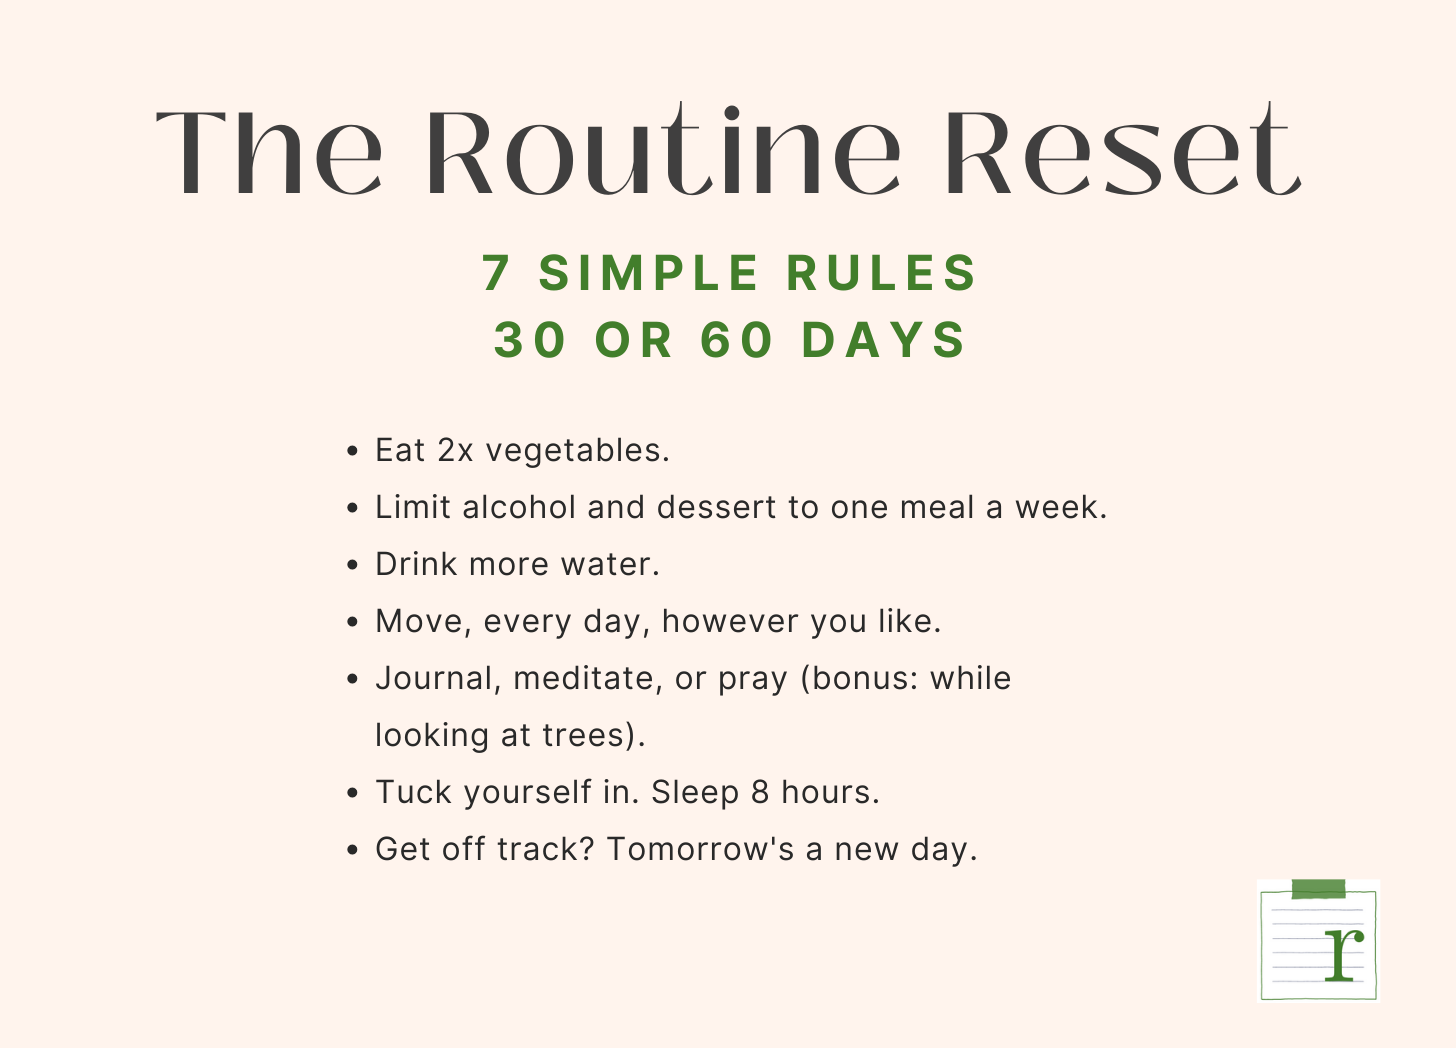 The Routine Reset, a flexible and forgiving fitness routine. 7 simple rules that can be done for 30 or 60 days. 